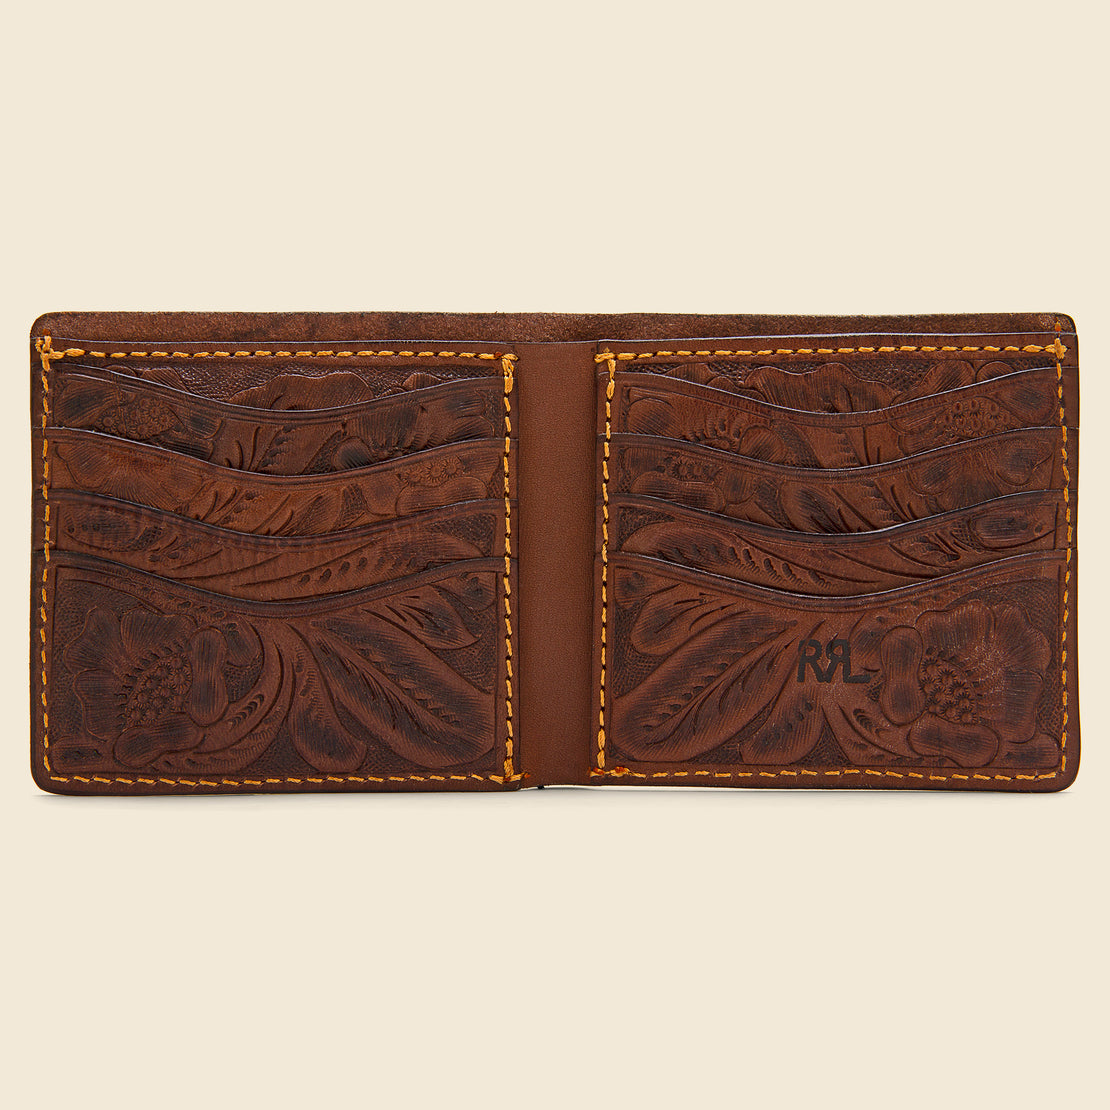 Tooled Leather Billfold - Brown - RRL - STAG Provisions - Accessories - Wallets